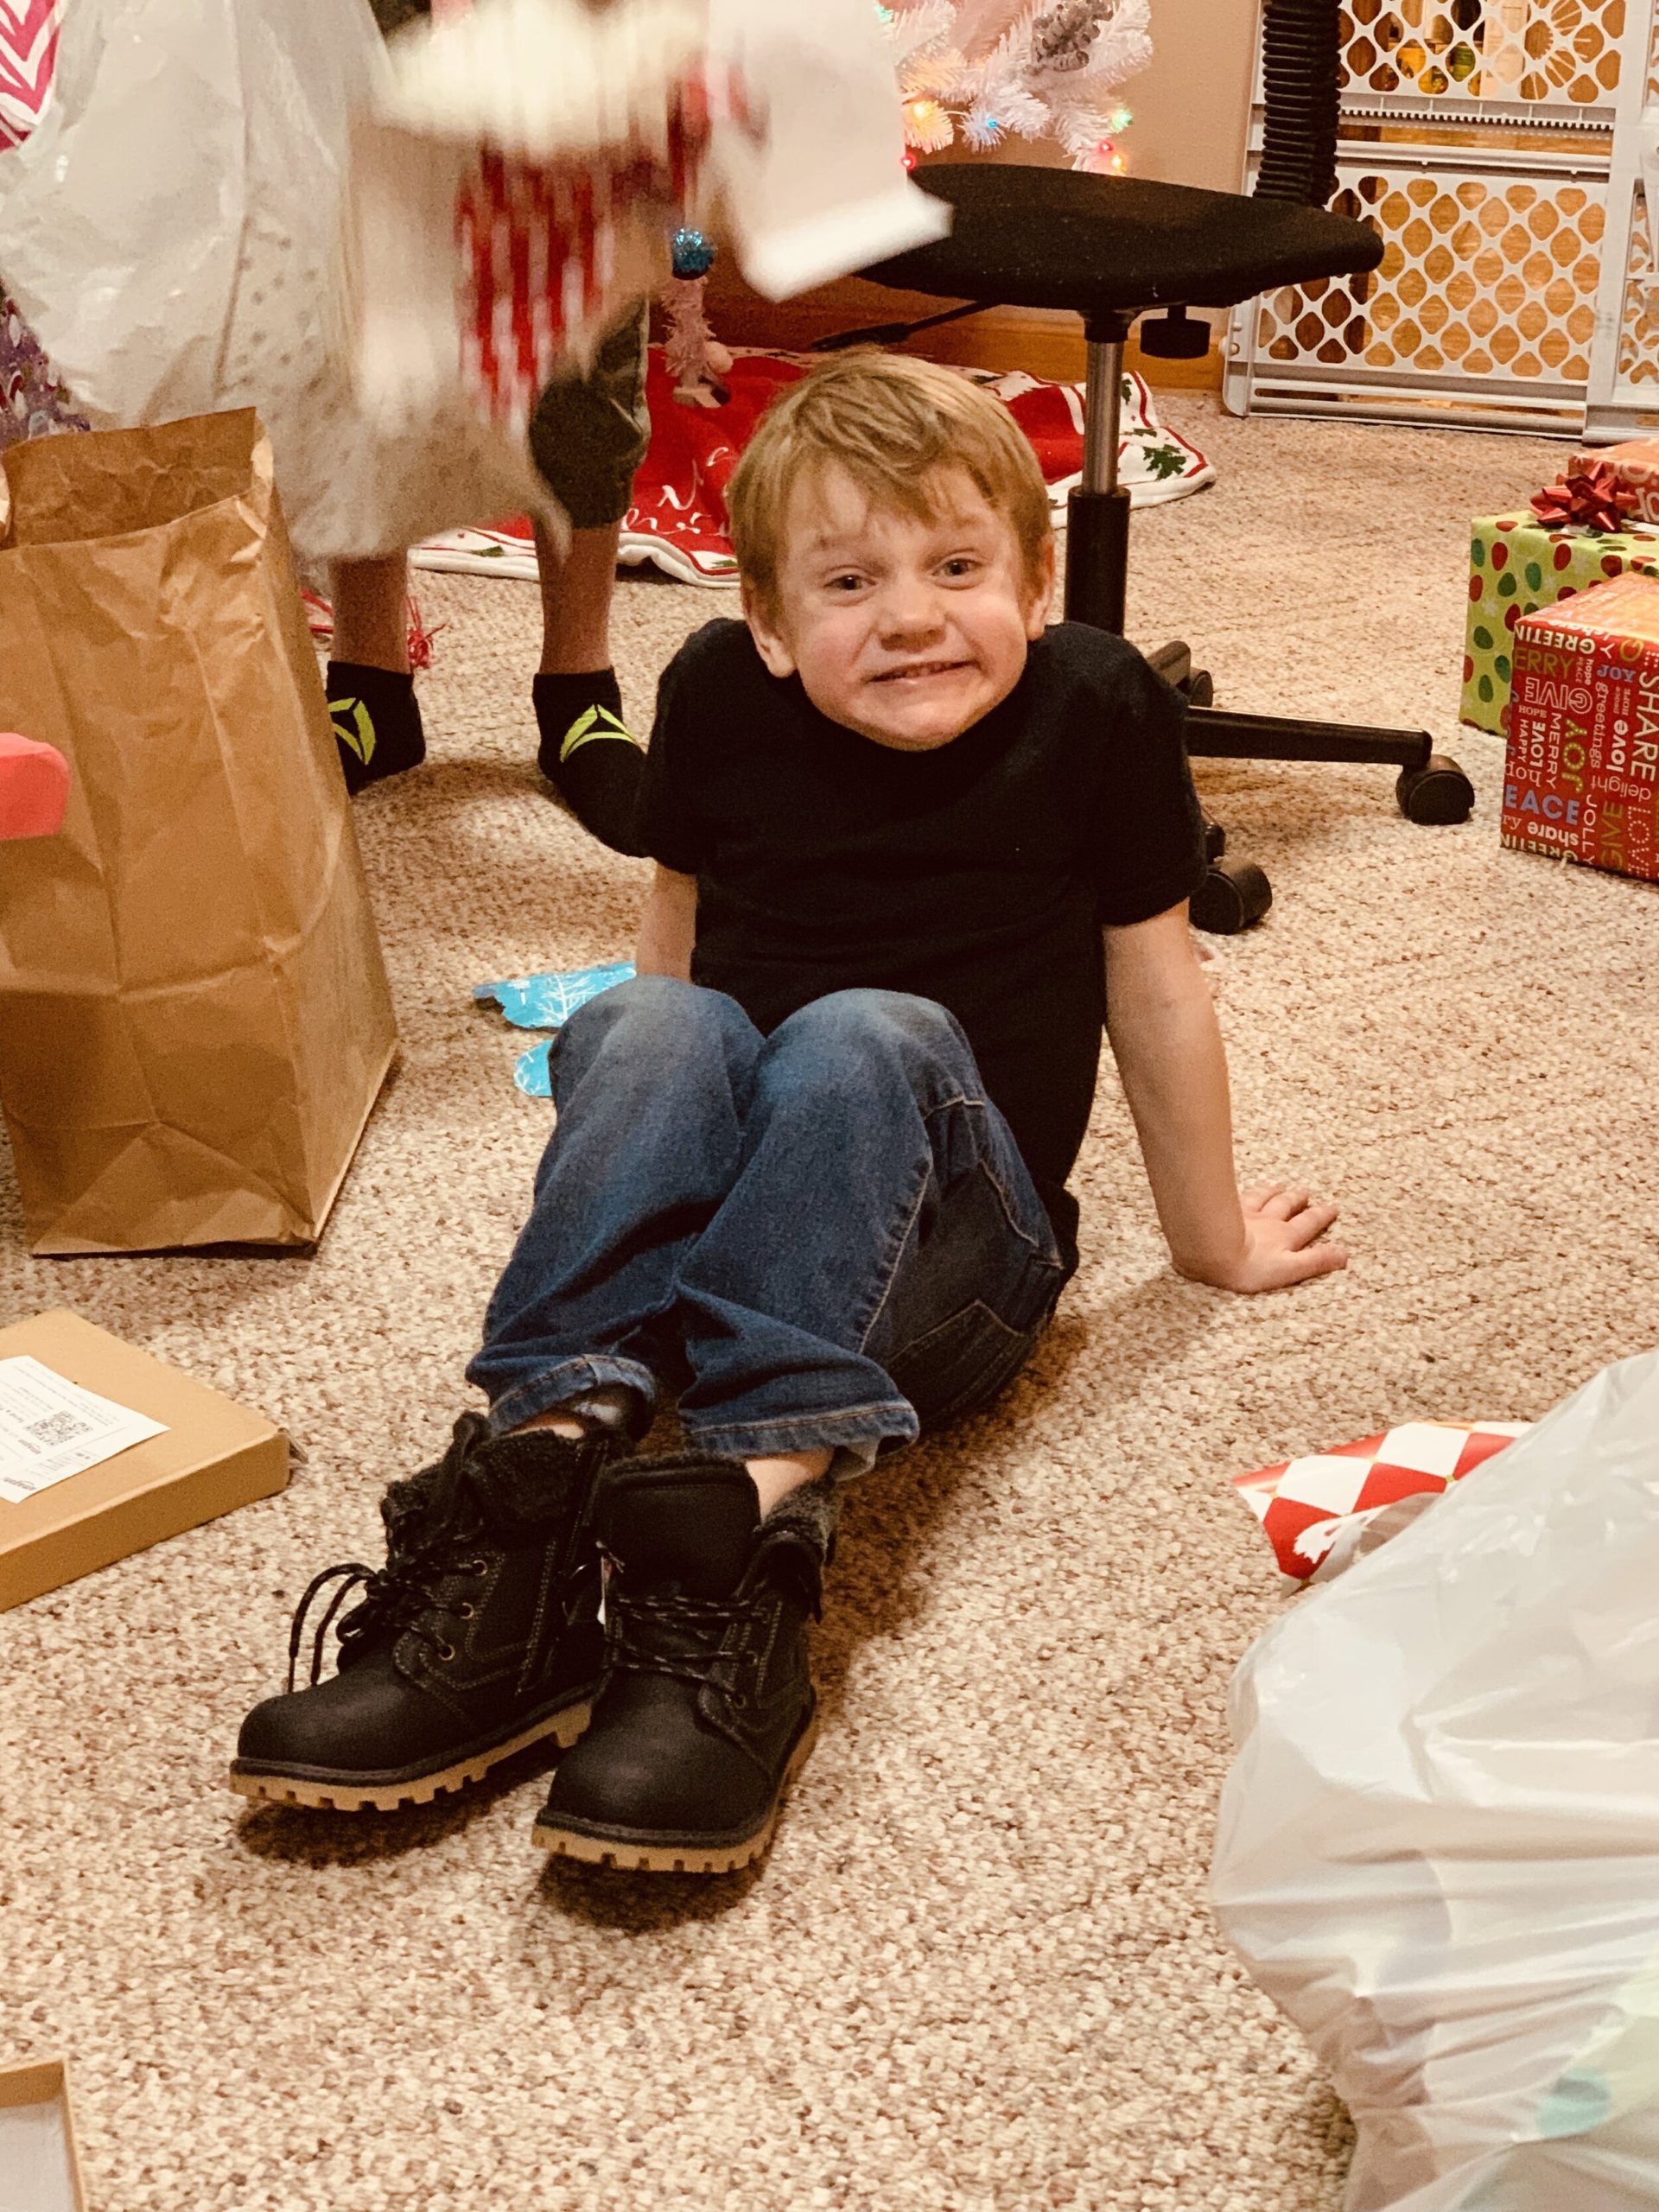 A little boy sitting on the ground wearing new shoes that were a Christmas present